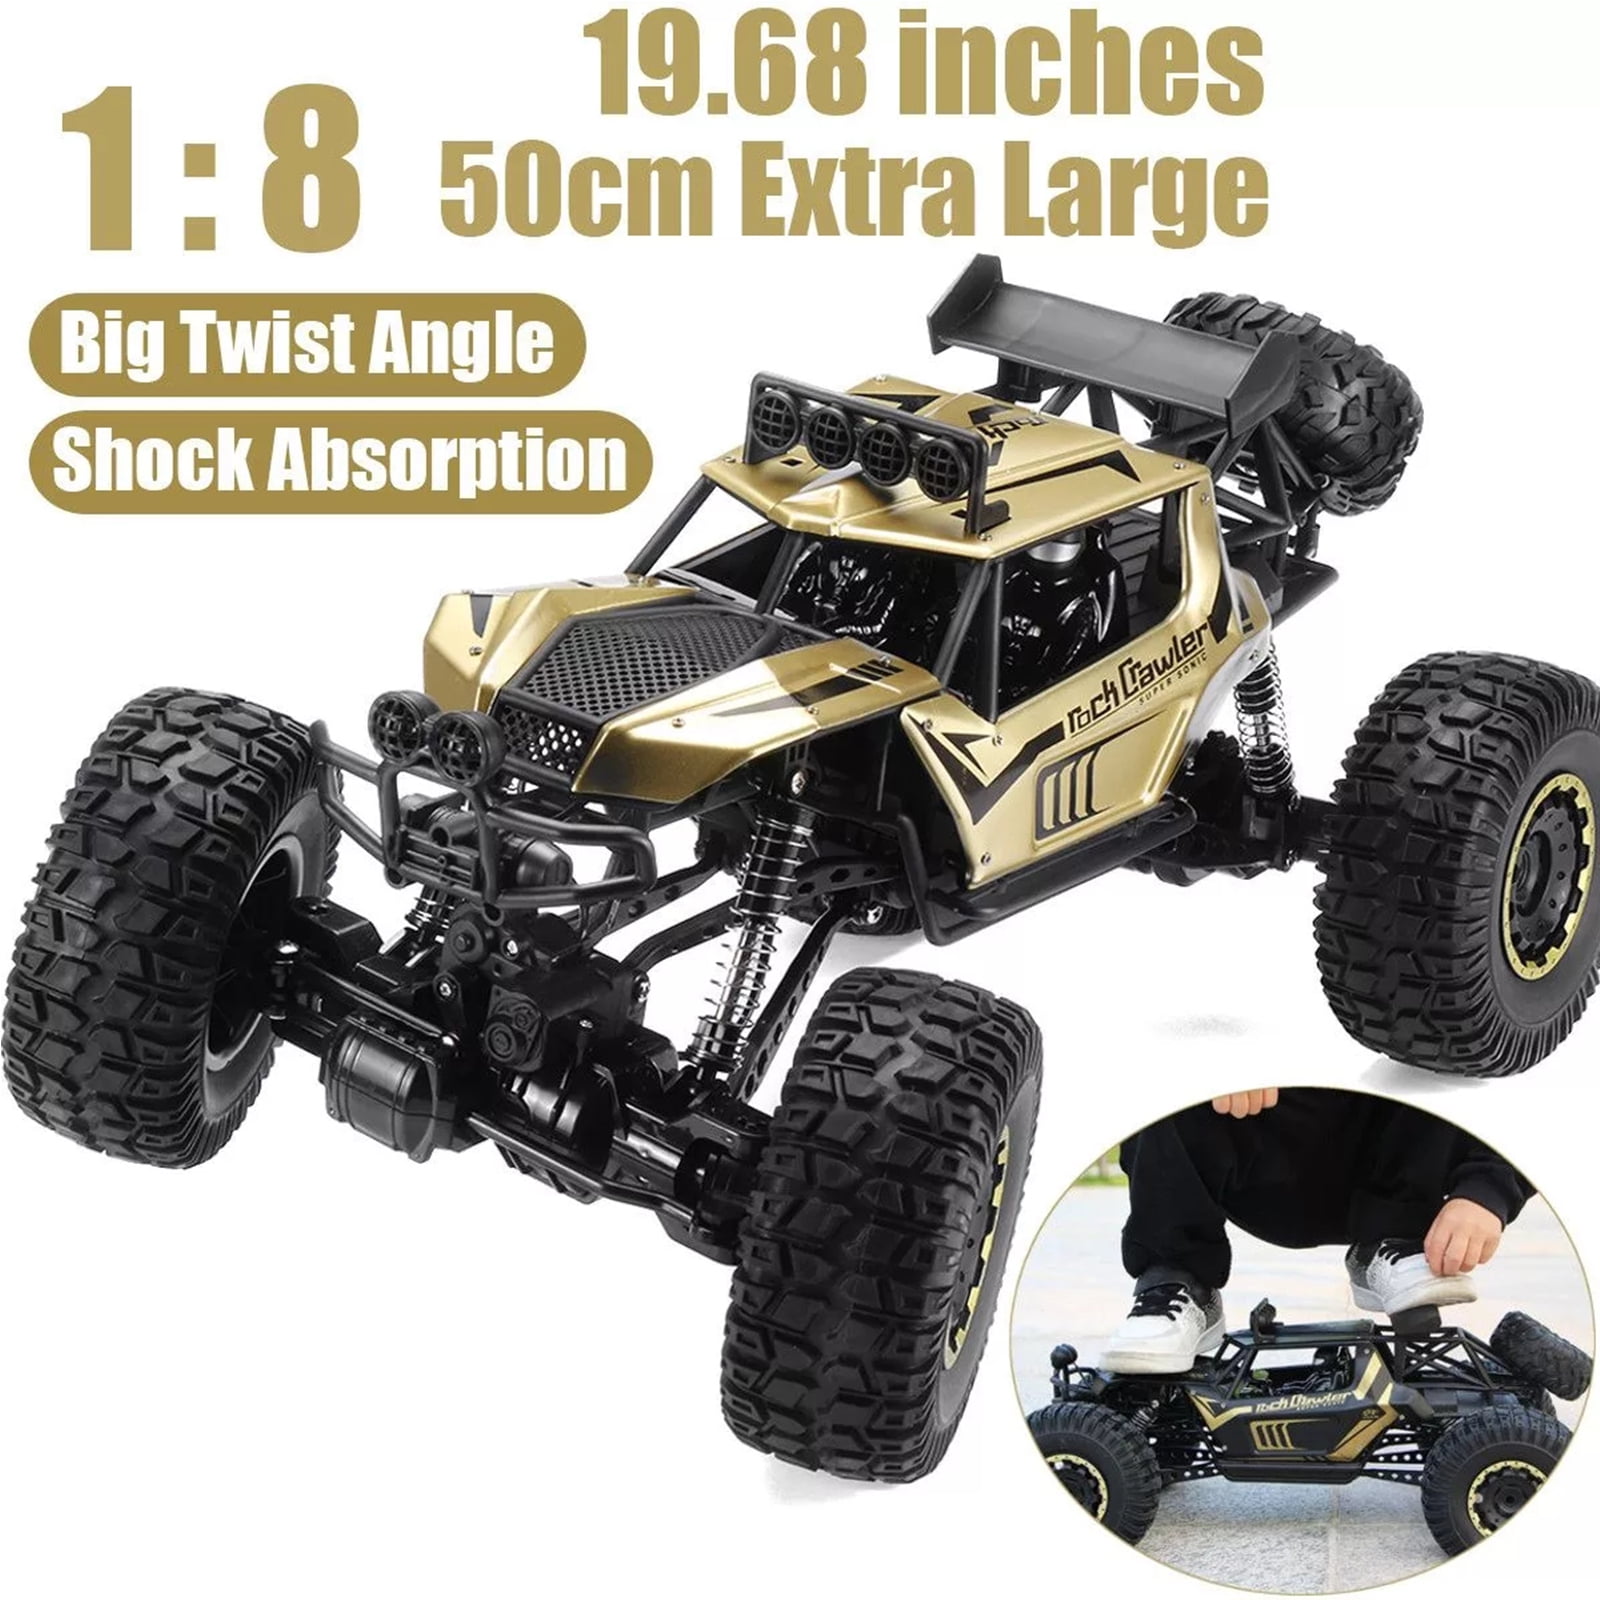 Details about   NEW 2.4G REMOTE CONTROL CAR ALLOY 4 CHANNEL 2 WHEEL OFF ROAD VEHICLE RECHARGEAB 